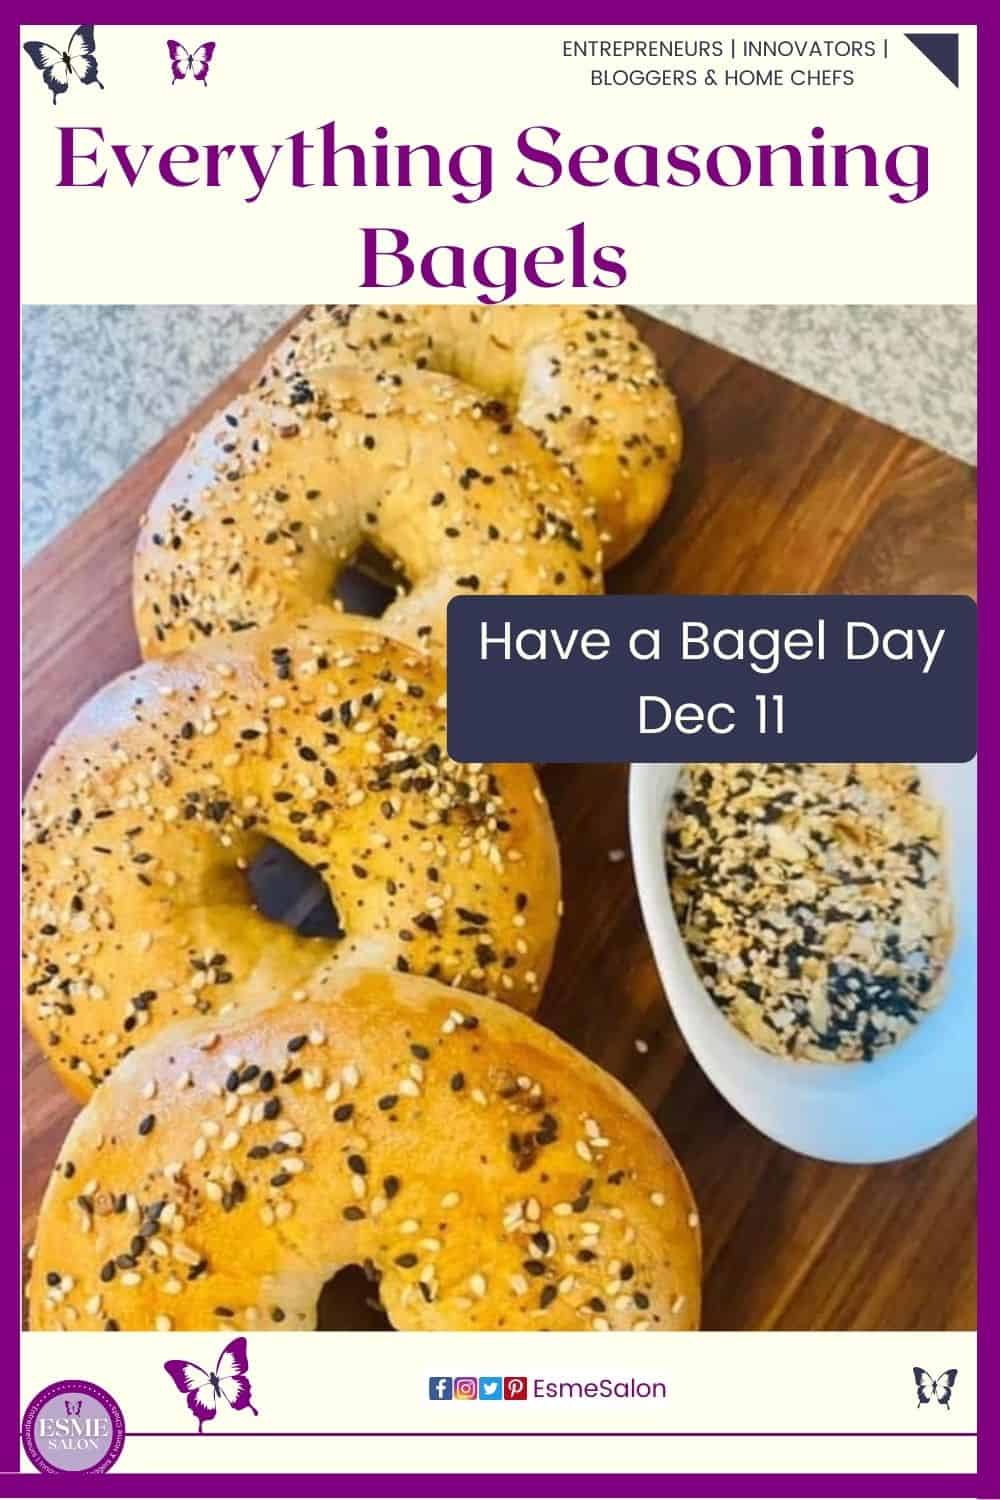 an image of everything bagel seasoning as well as baked home-made bagels with this topping